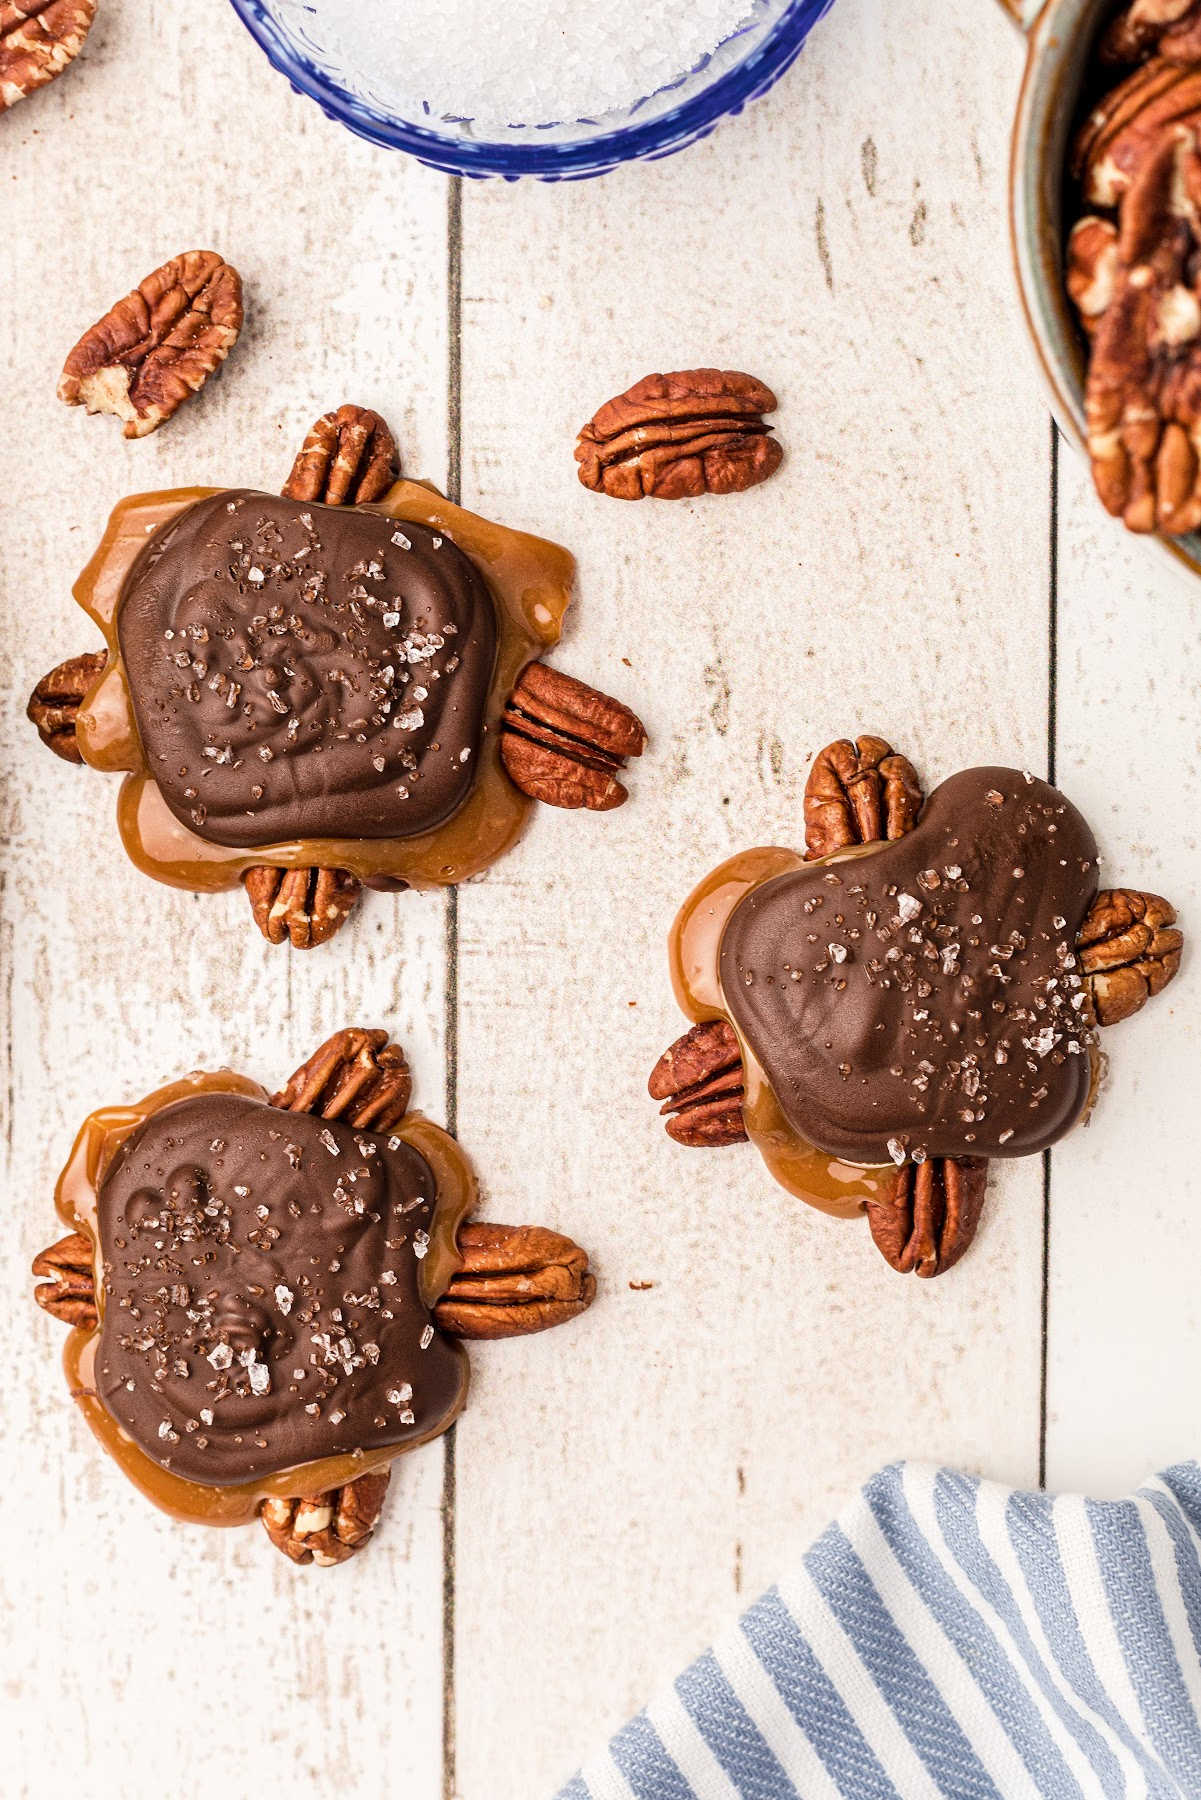 chocolate and caramel melted over pecans to look like a turtle